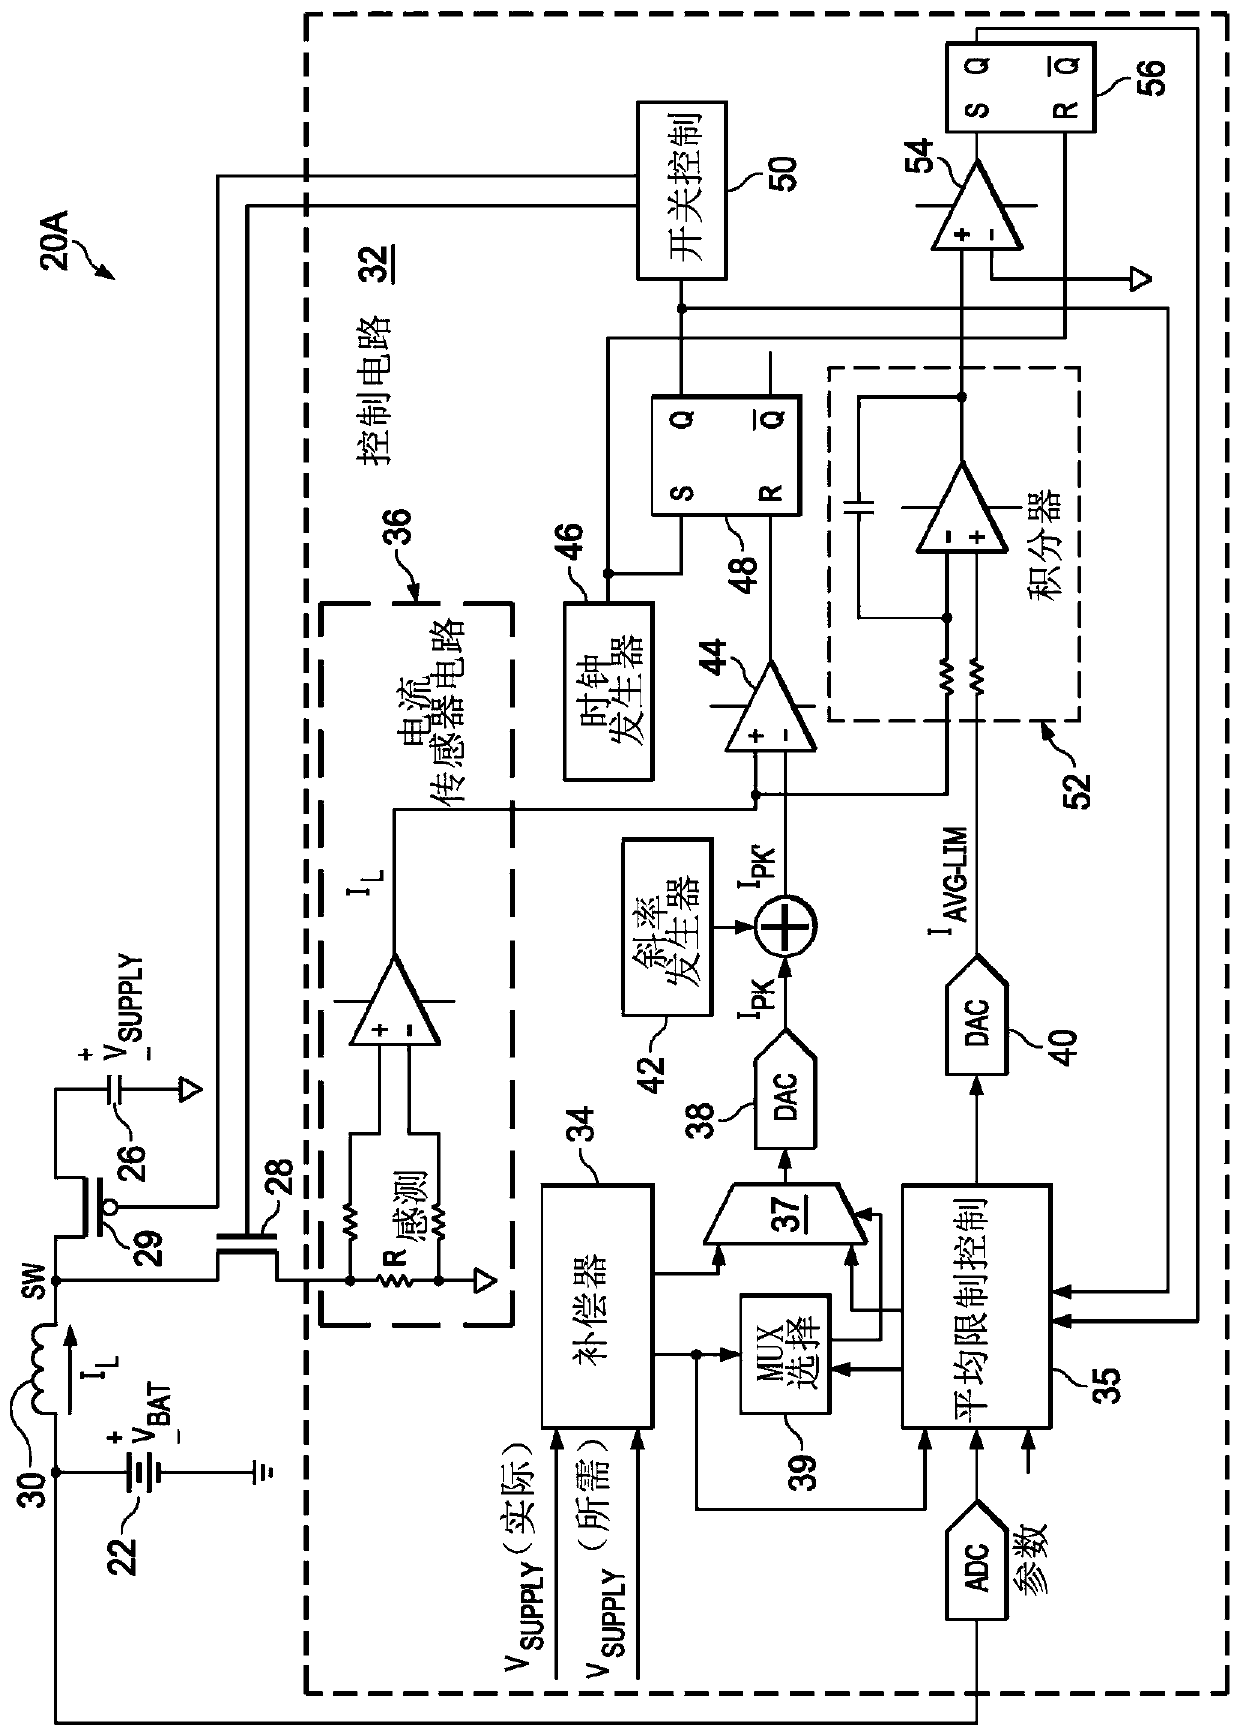 Limiting average current in a peak-controlled boost converter